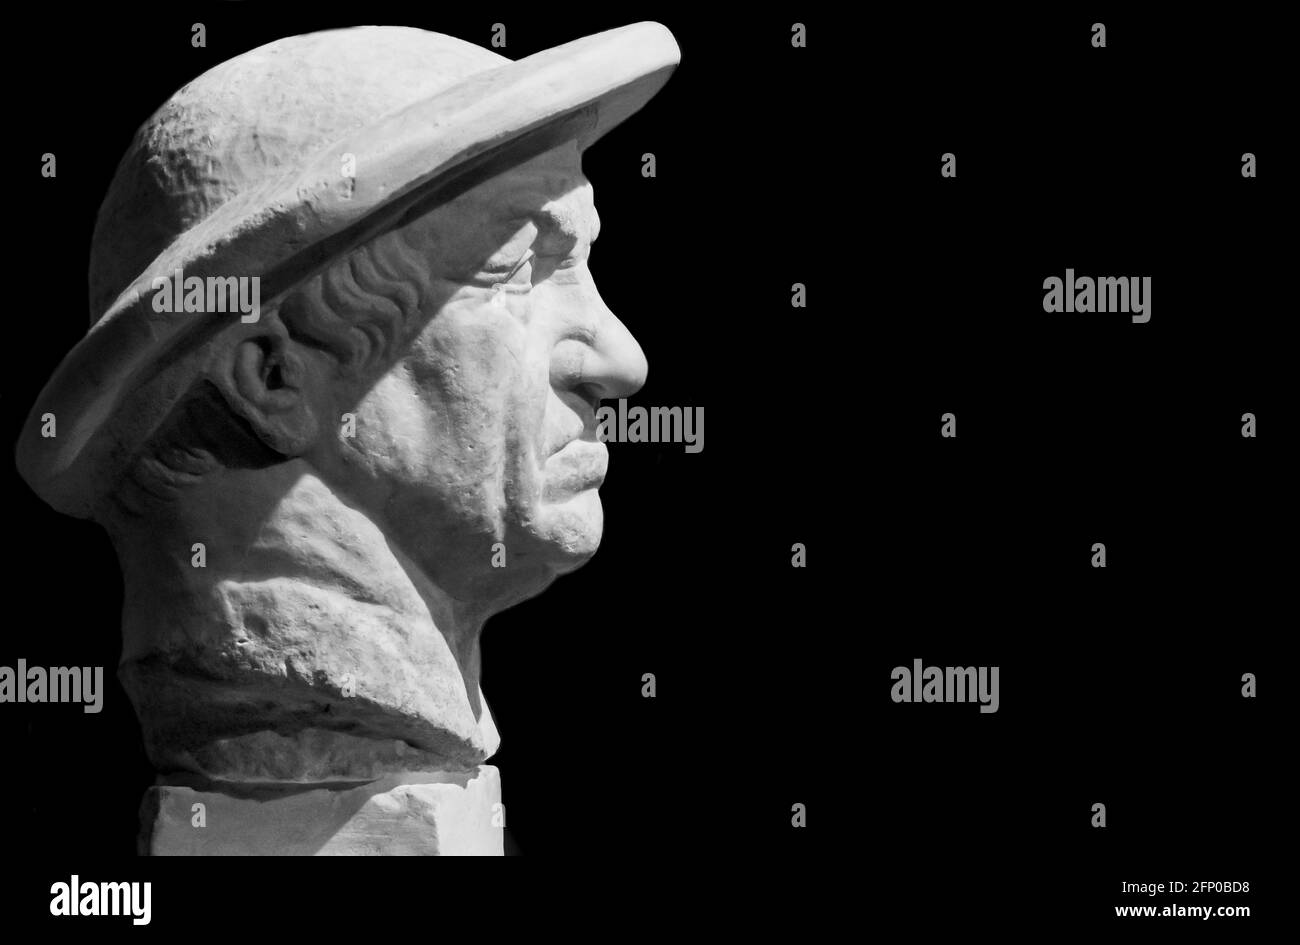 Black and white photo in close-up on grumpy face in profile of statue of senior man with a hat Stock Photo